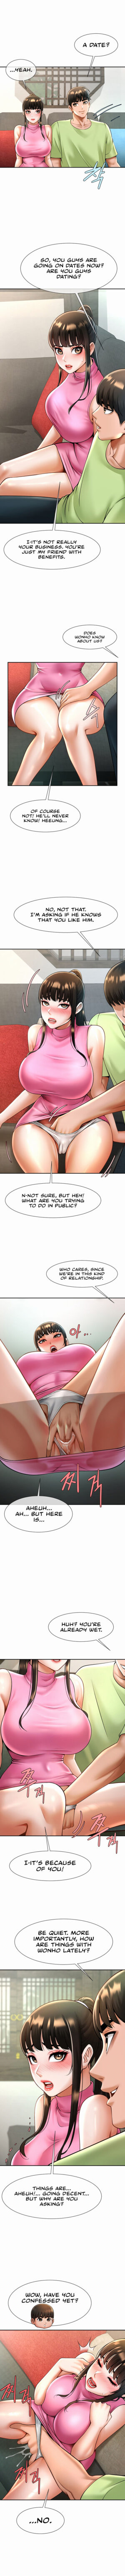 [Epiphany, Red Tissue] The Cheat Code Hitter Fucks Them All (1-16) [English] [Omega Scans] [Ongoing]